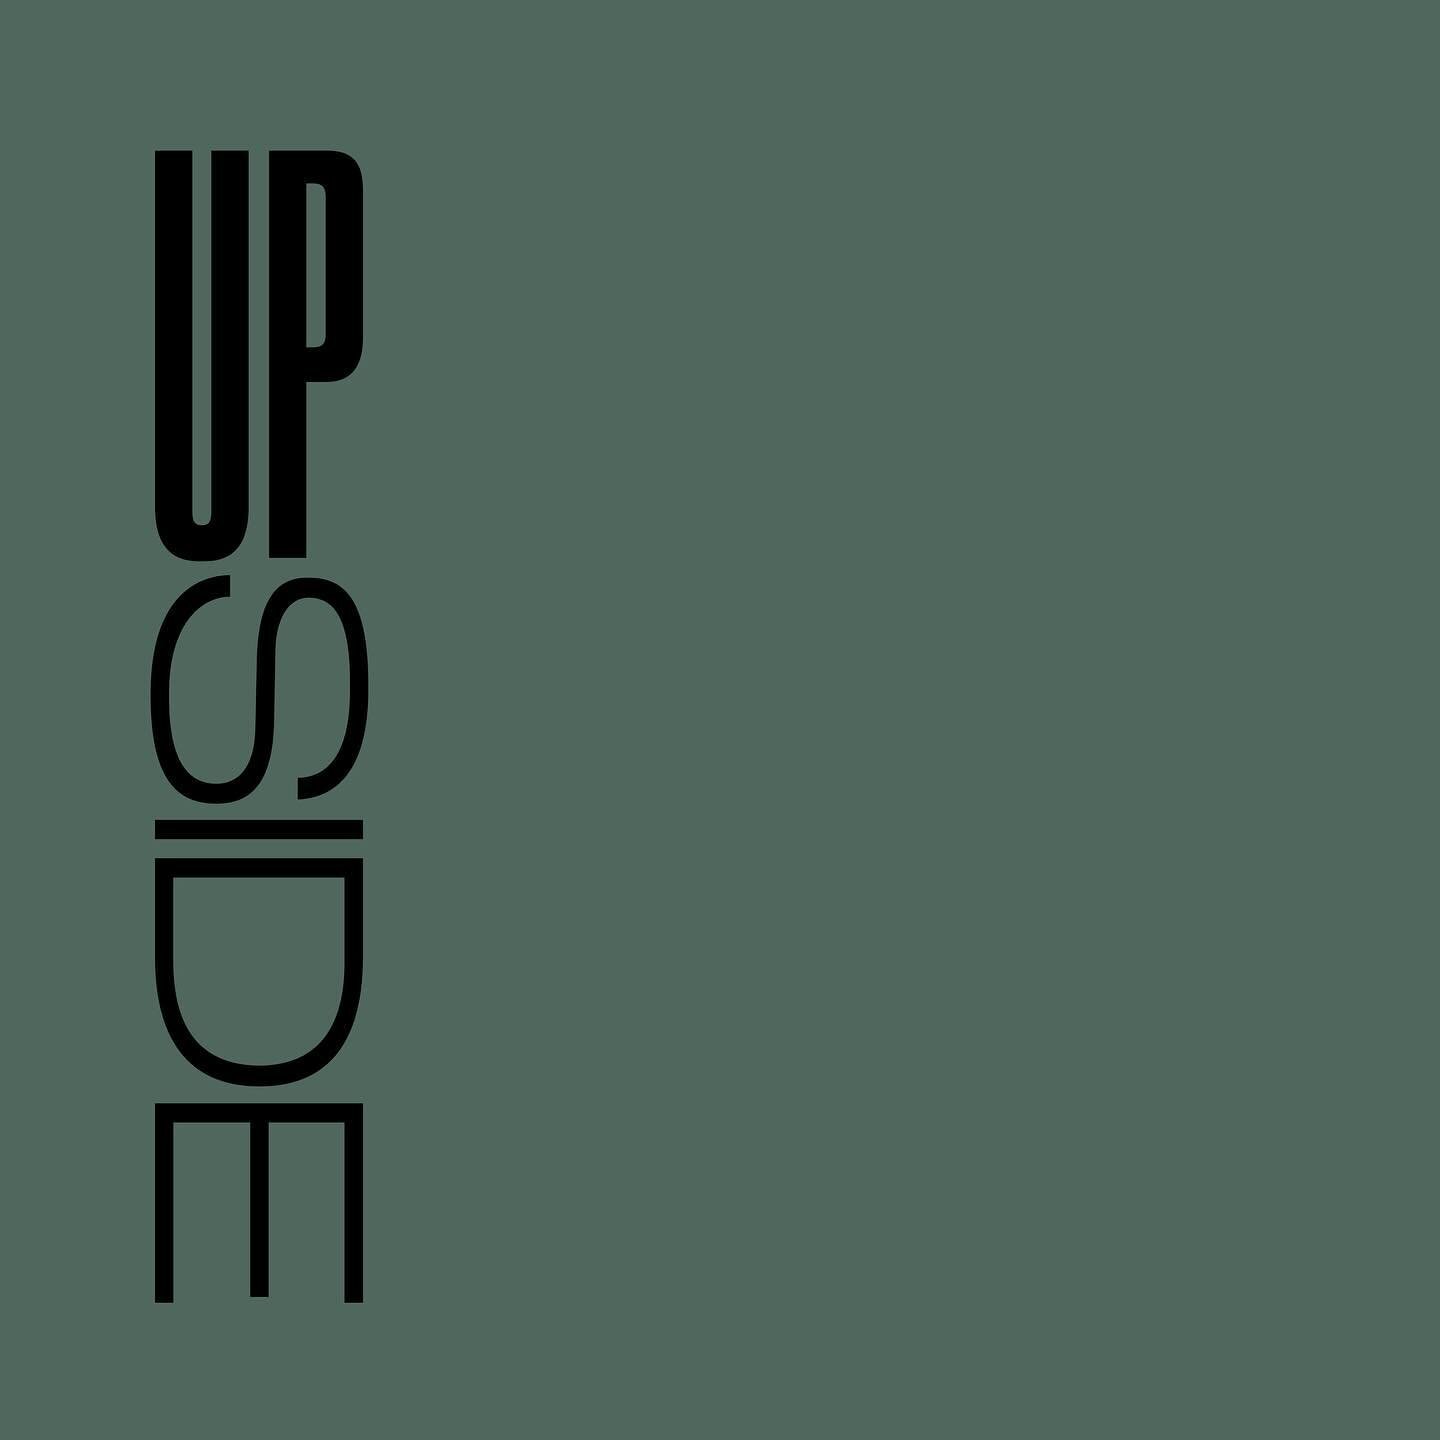 &amp; Upside

Upside redefines modern urban living. A first of its kind in the region, delivering a hassle free, co-living experience with community at its core. Upside provides a better experience for young professionals and entrepreneurs making the